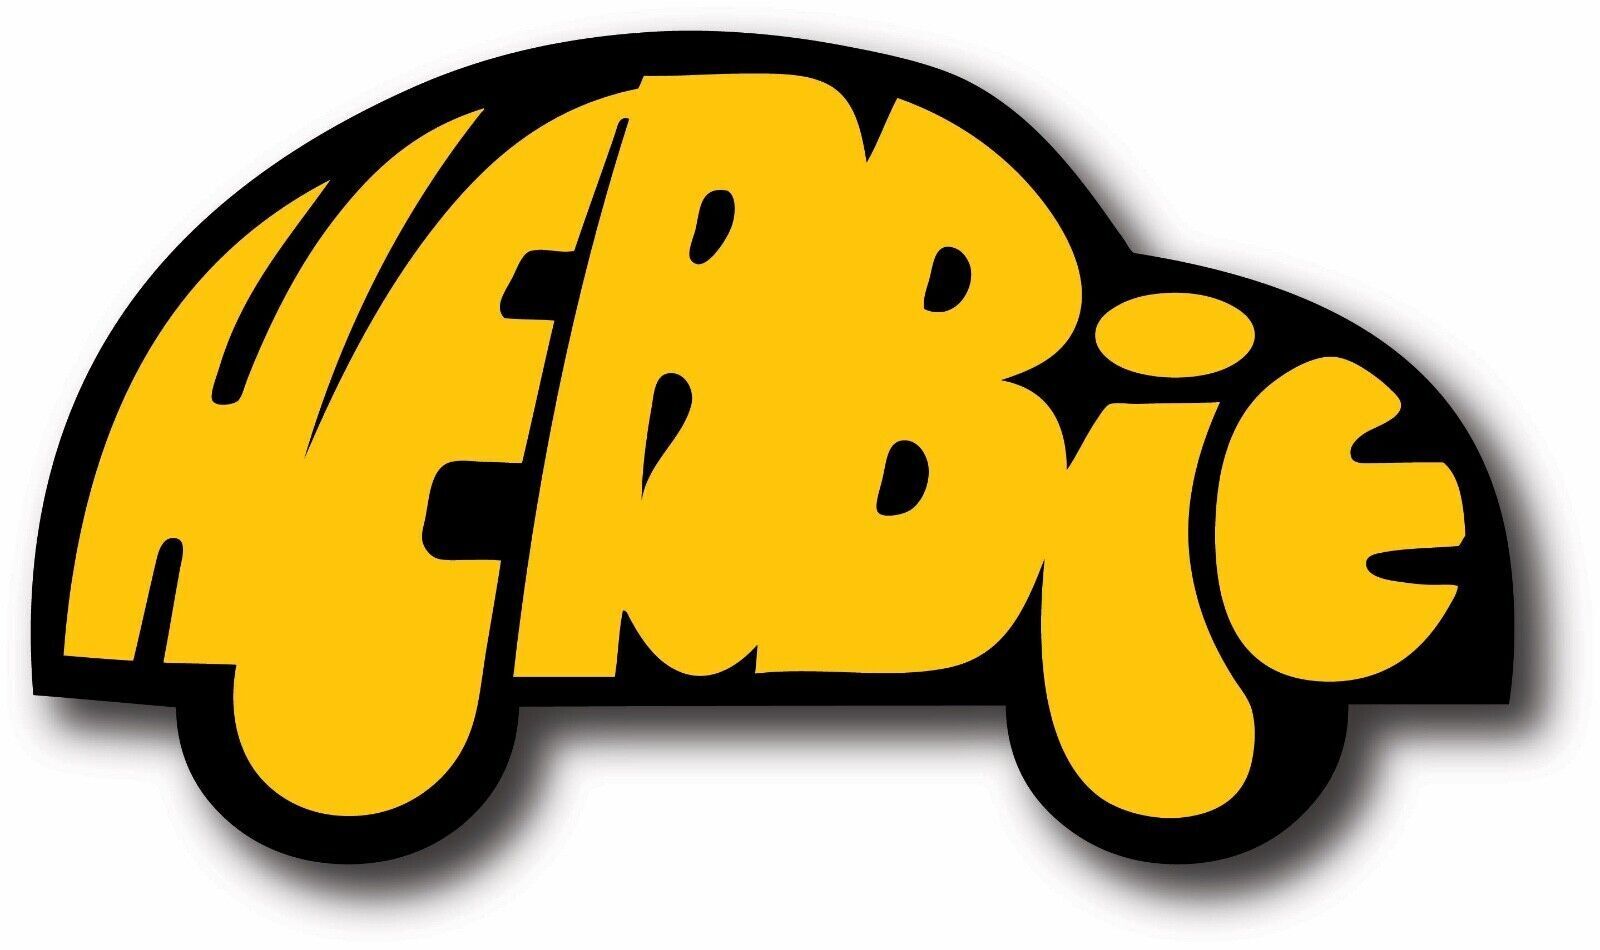 Herbie the Love Bug VW Beetle Sticker / Vinyl Decal  | 10 Sizes with TRACKING